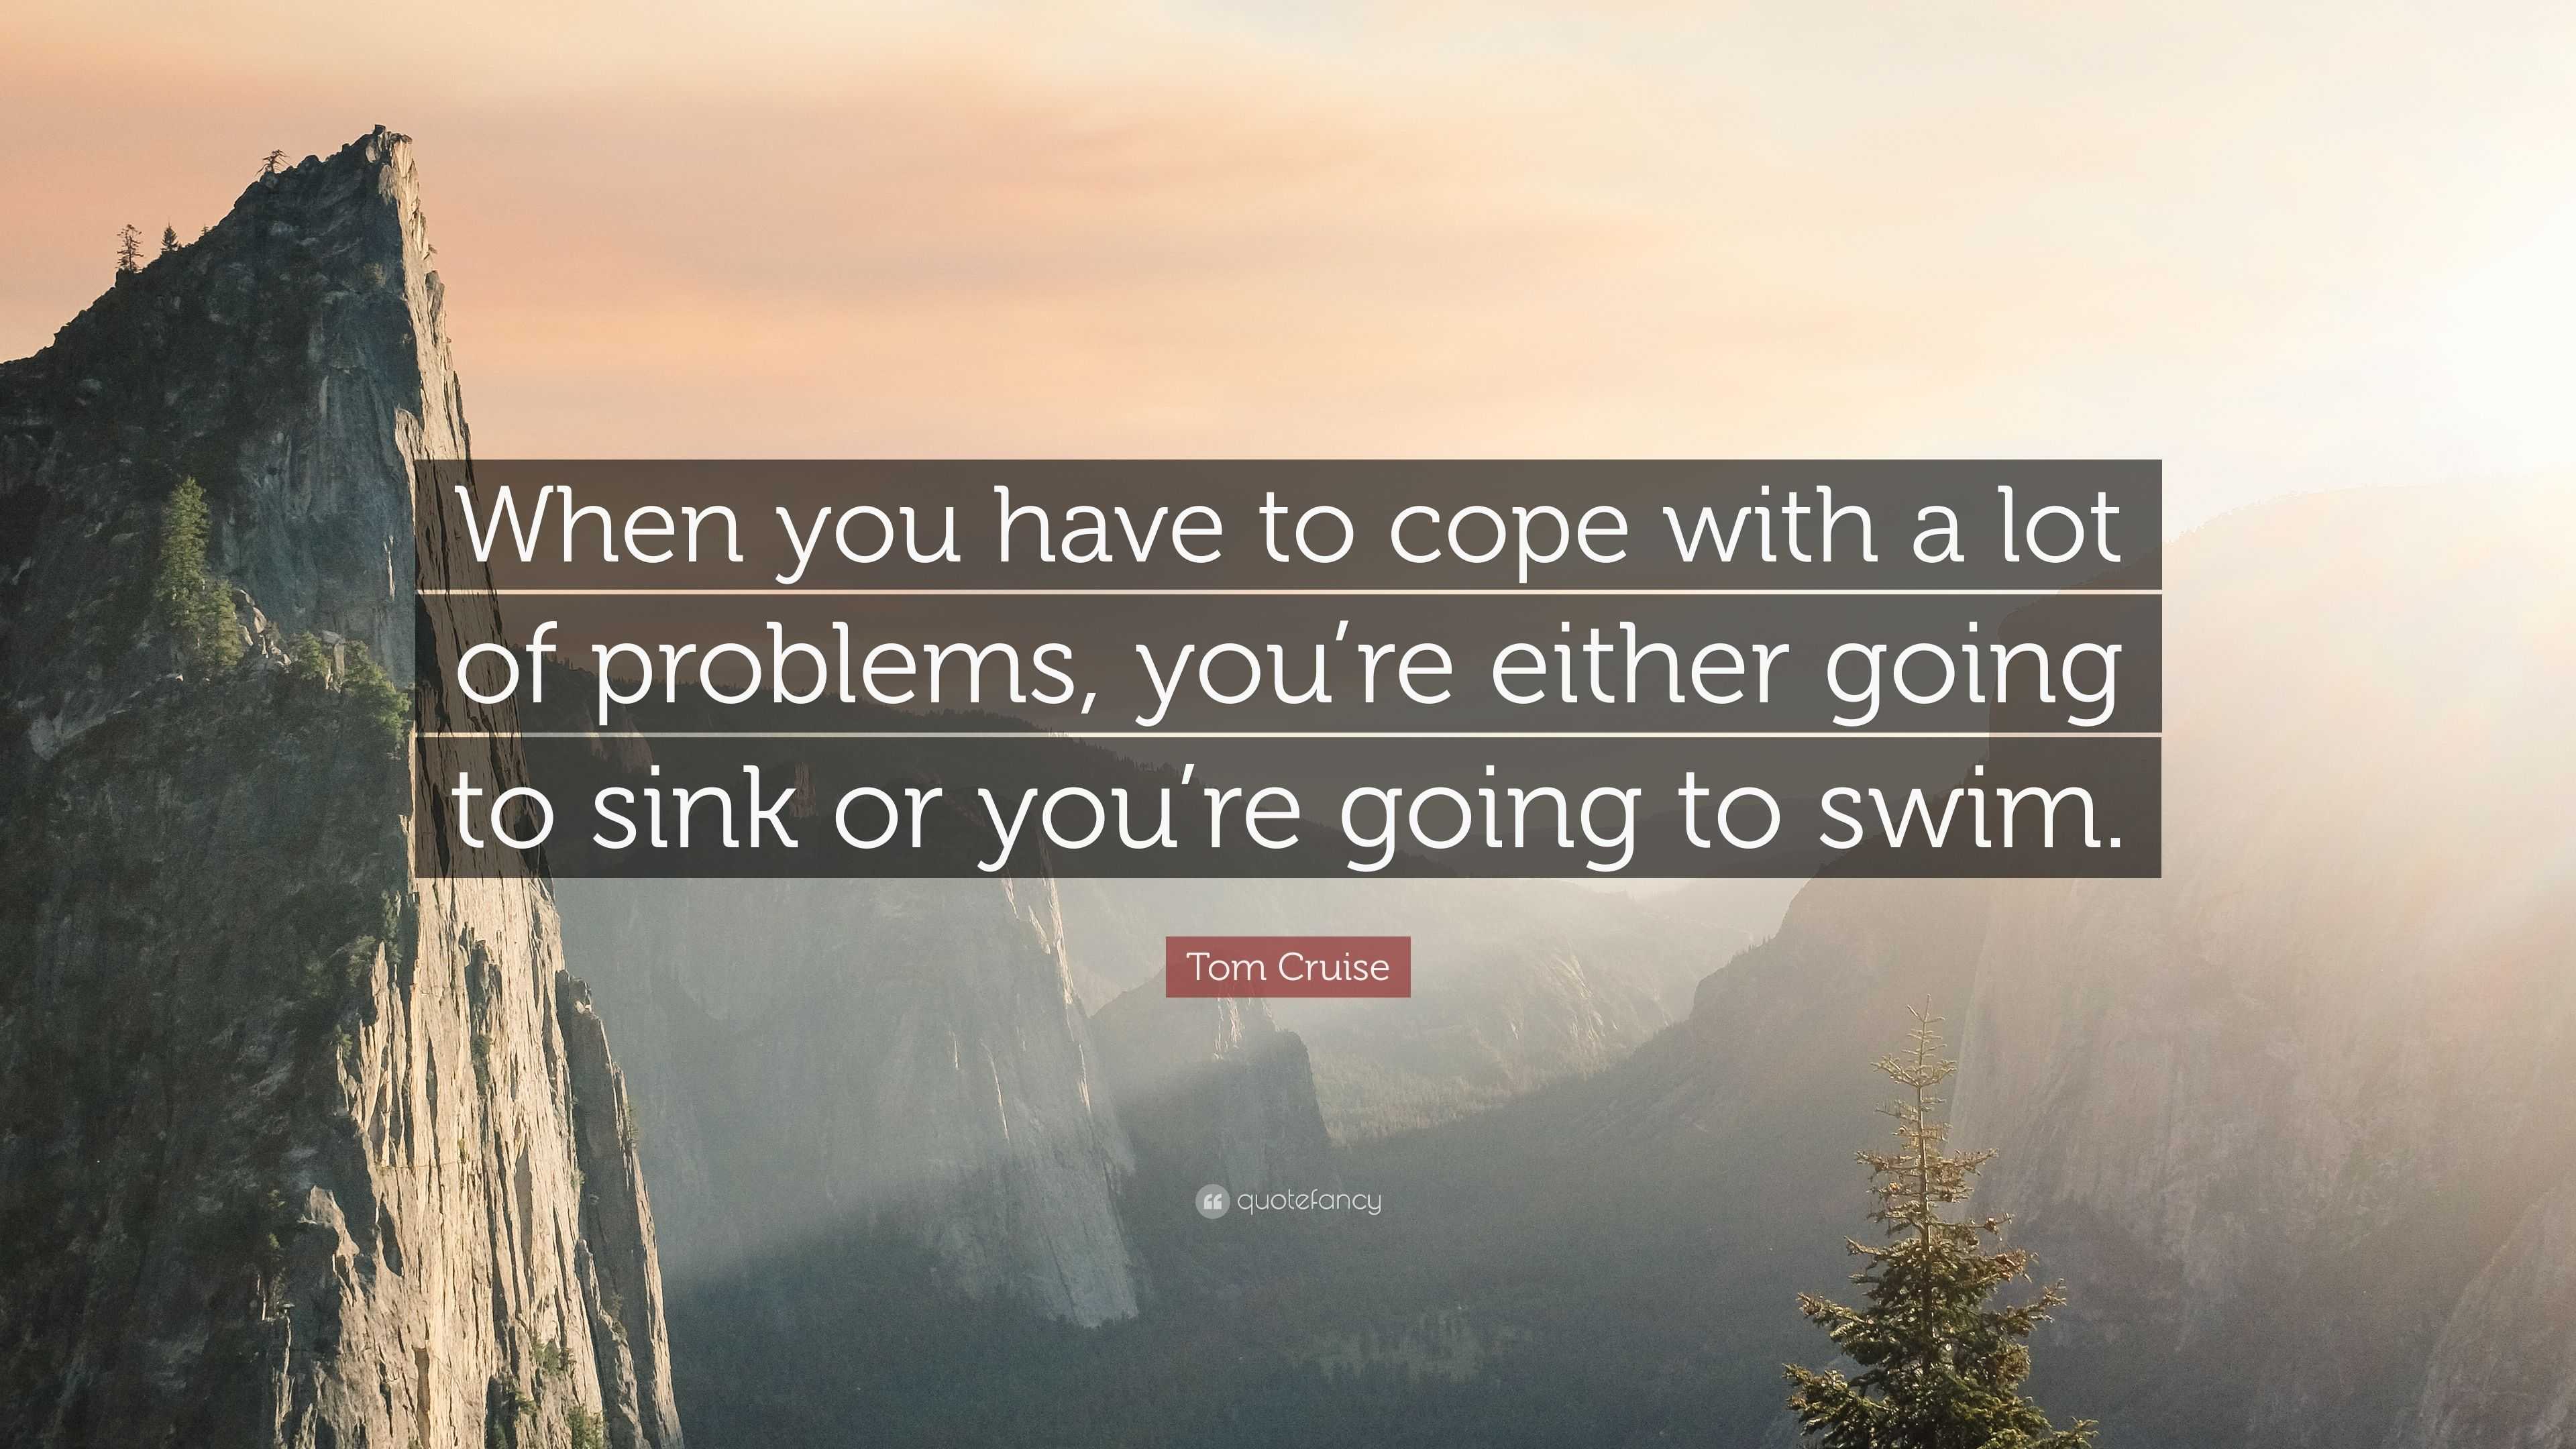 Tom Cruise Quote: “When You Have To Cope With A Lot Of Problems, You're Either